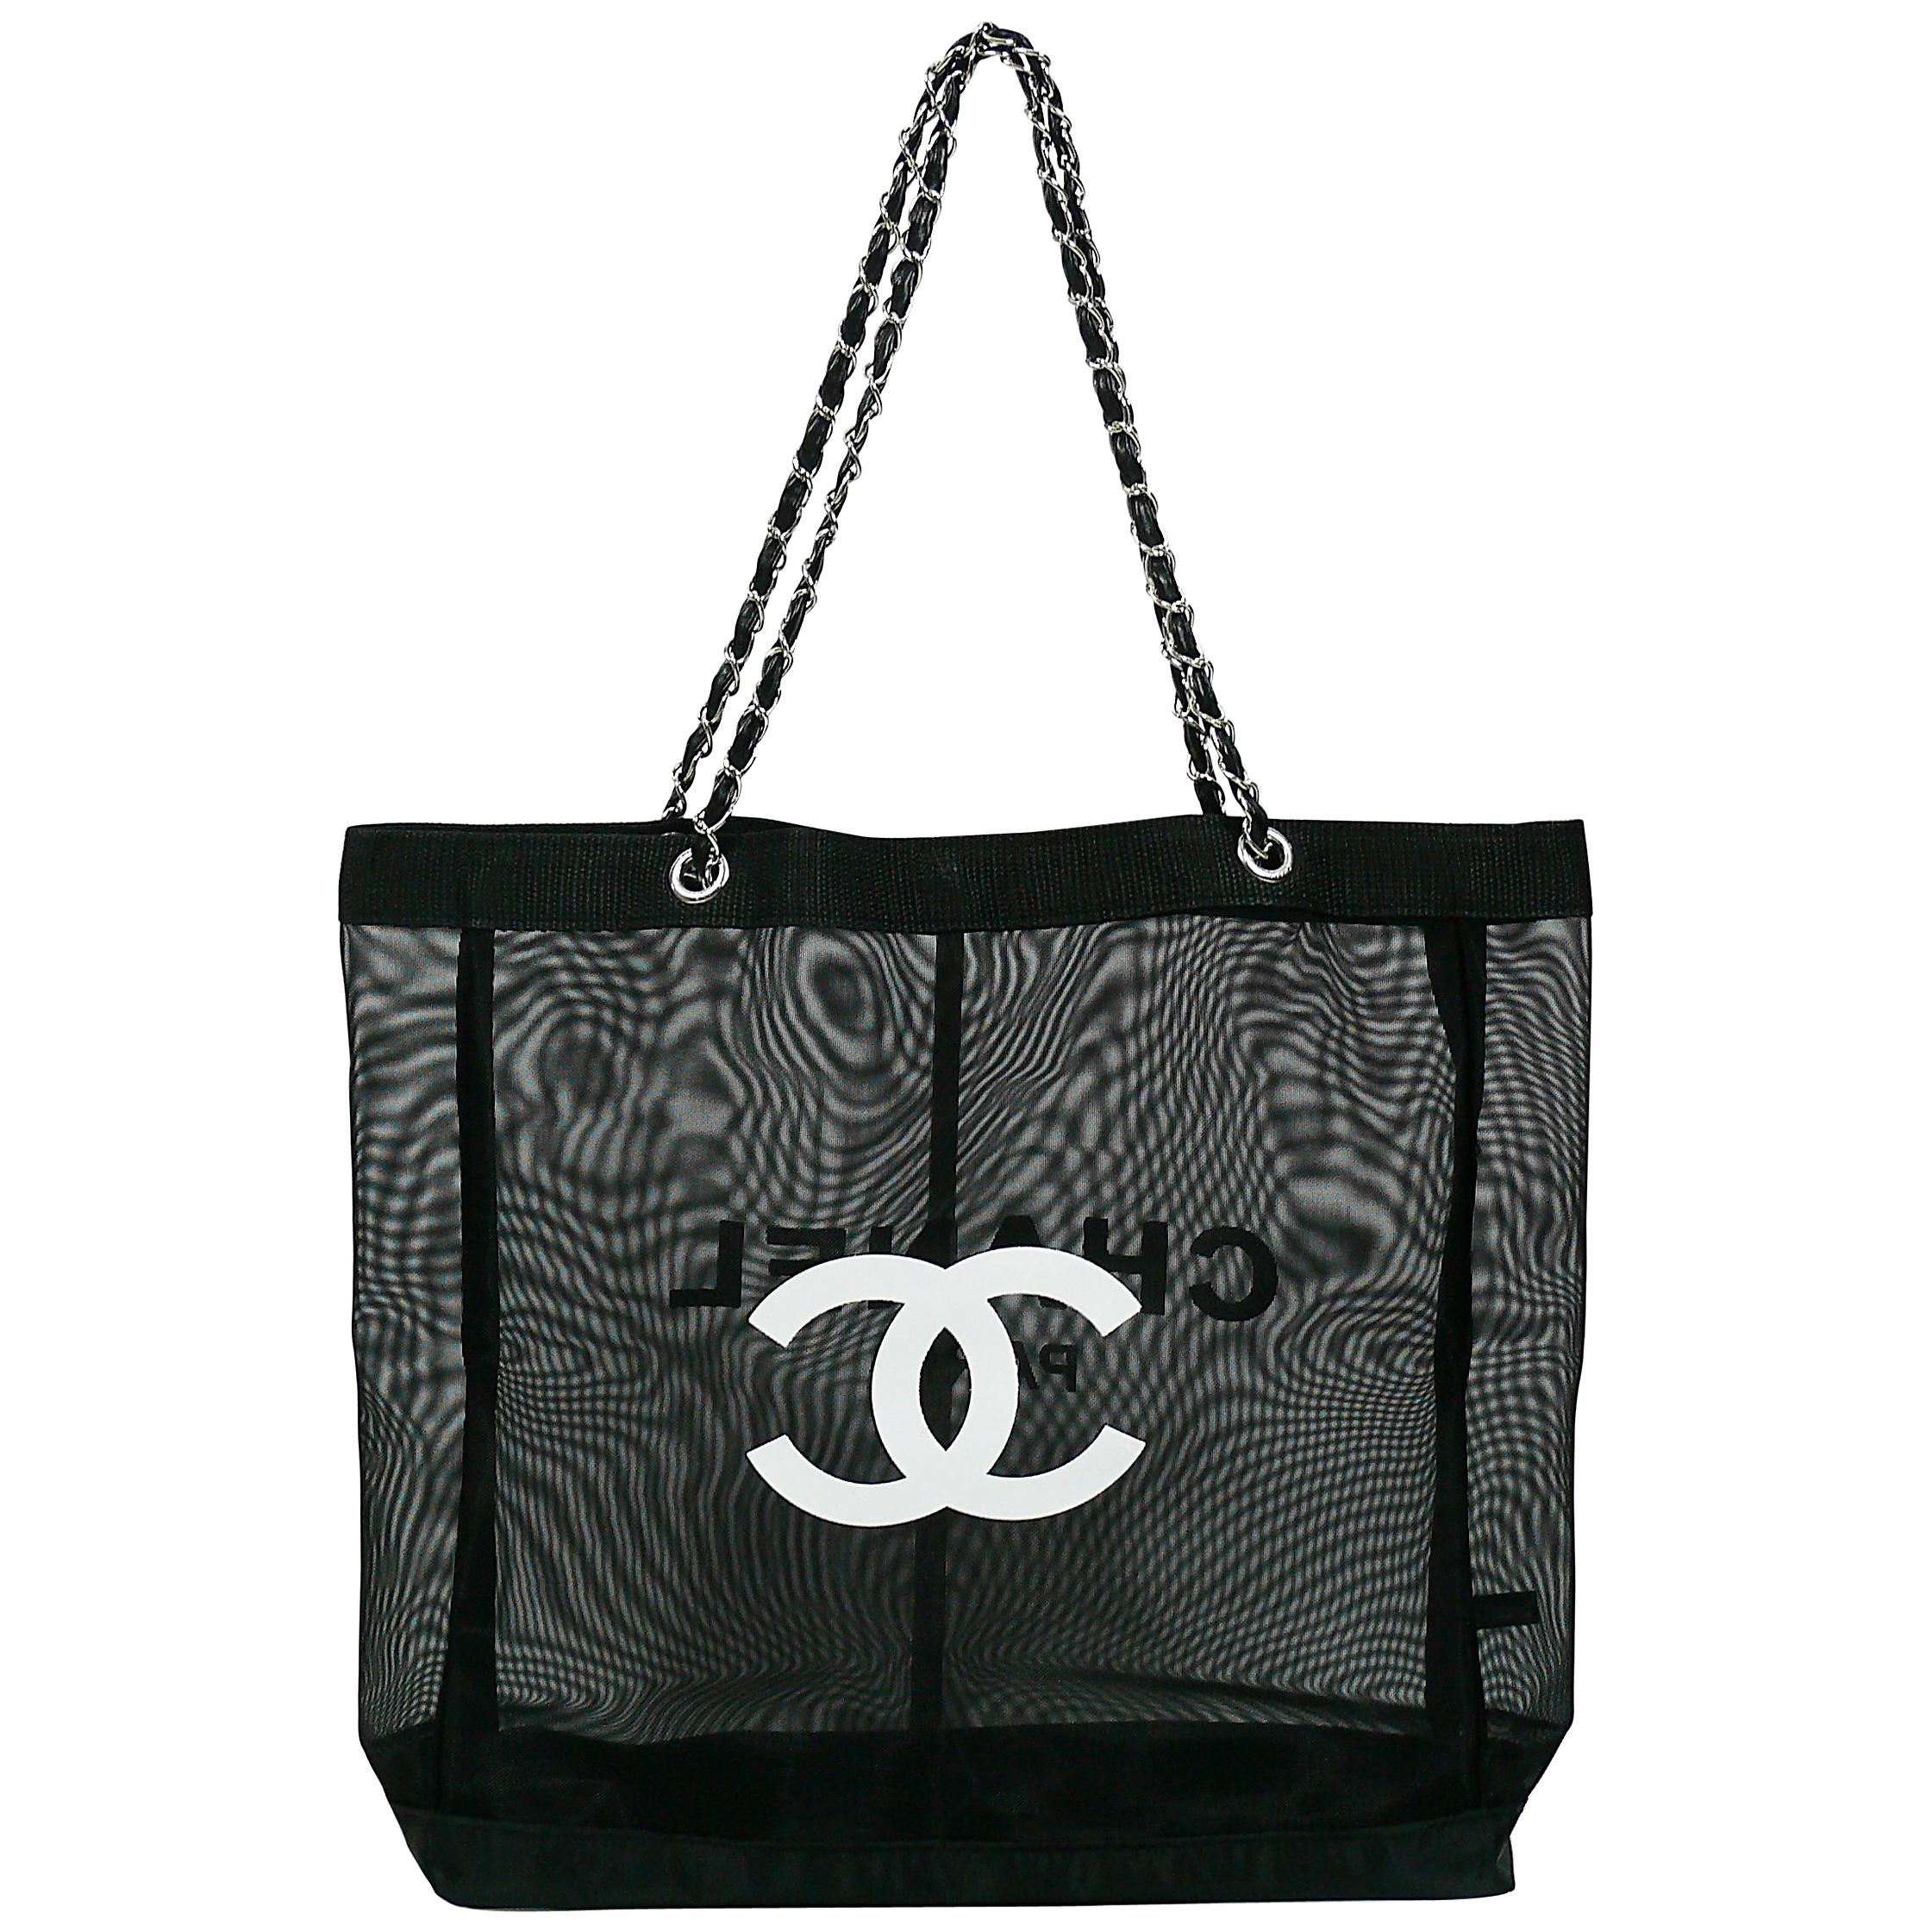 Chanel Mesh Tote Shopping Promotional Gift Bag